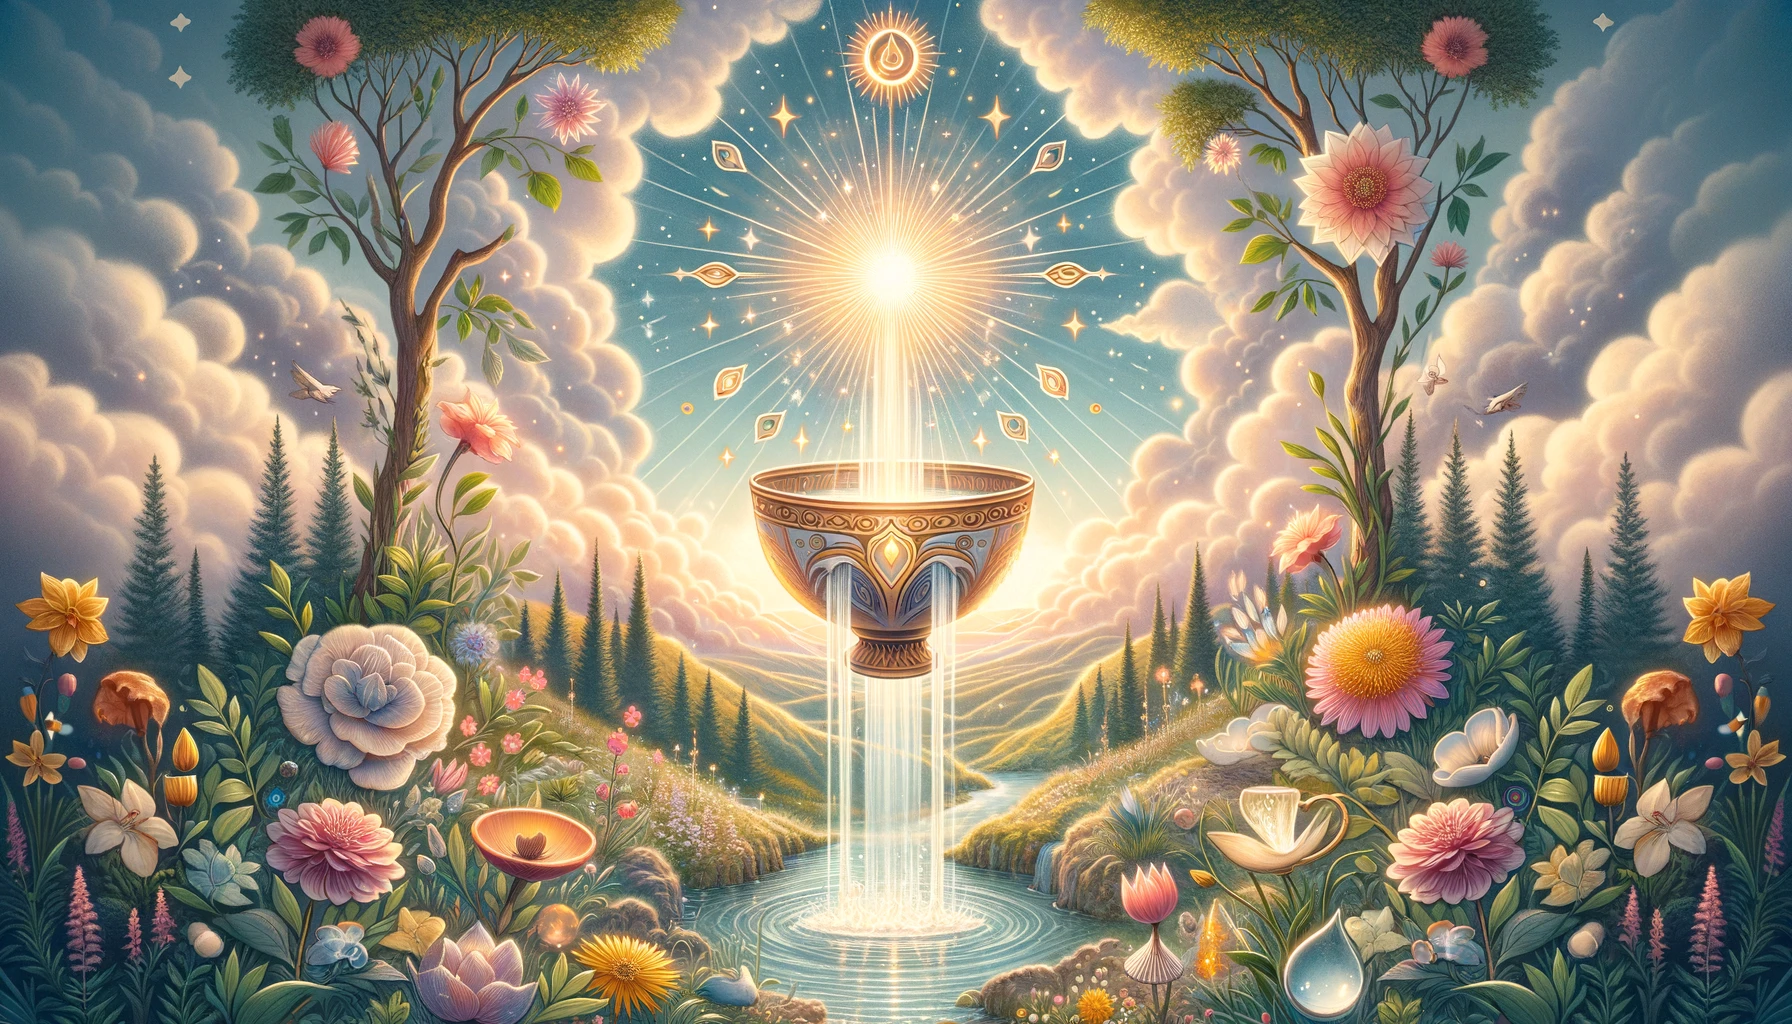 "Illustration representing the Ace of Cups symbolizing emotional beginnings and the nurturing of new relationships. A radiant, overflowing cup amidst a serene landscape conveys a sense of profound emotional and spiritual renewal, embodying the essence of love, healing, and the awakening of the subconscious."